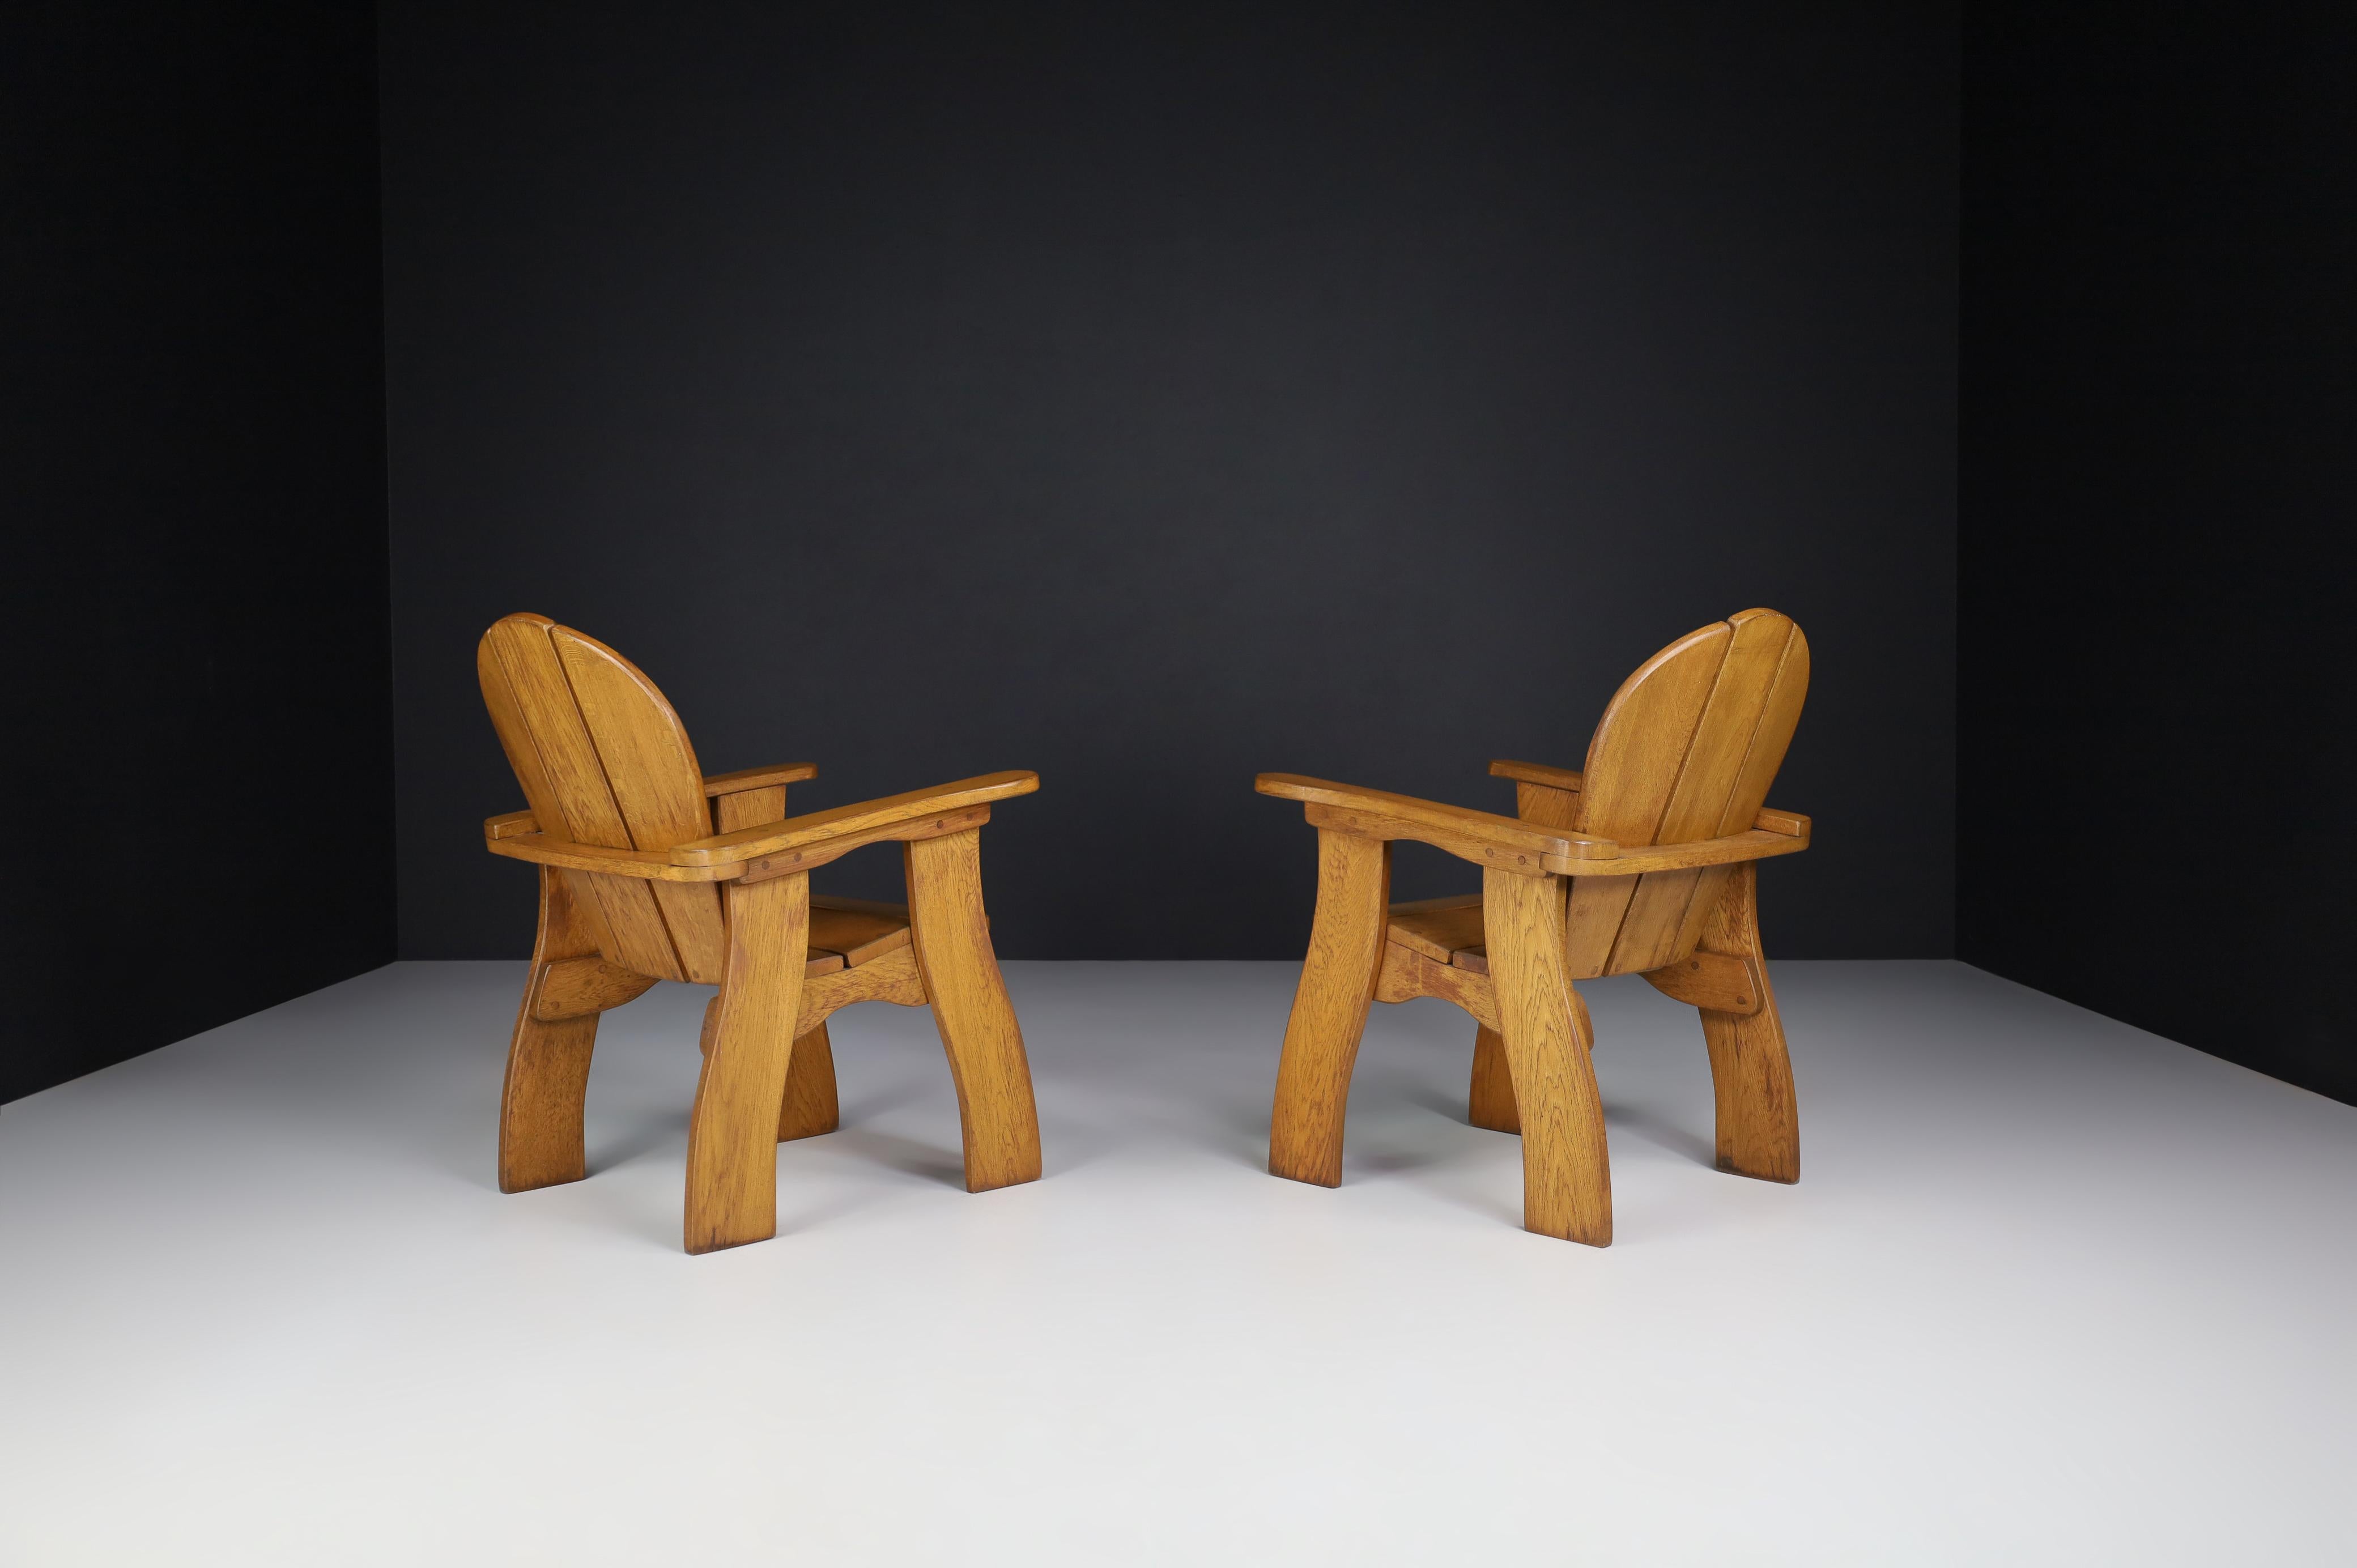 20th Century Sculptural Armchairs in Oak, France, 1960s For Sale